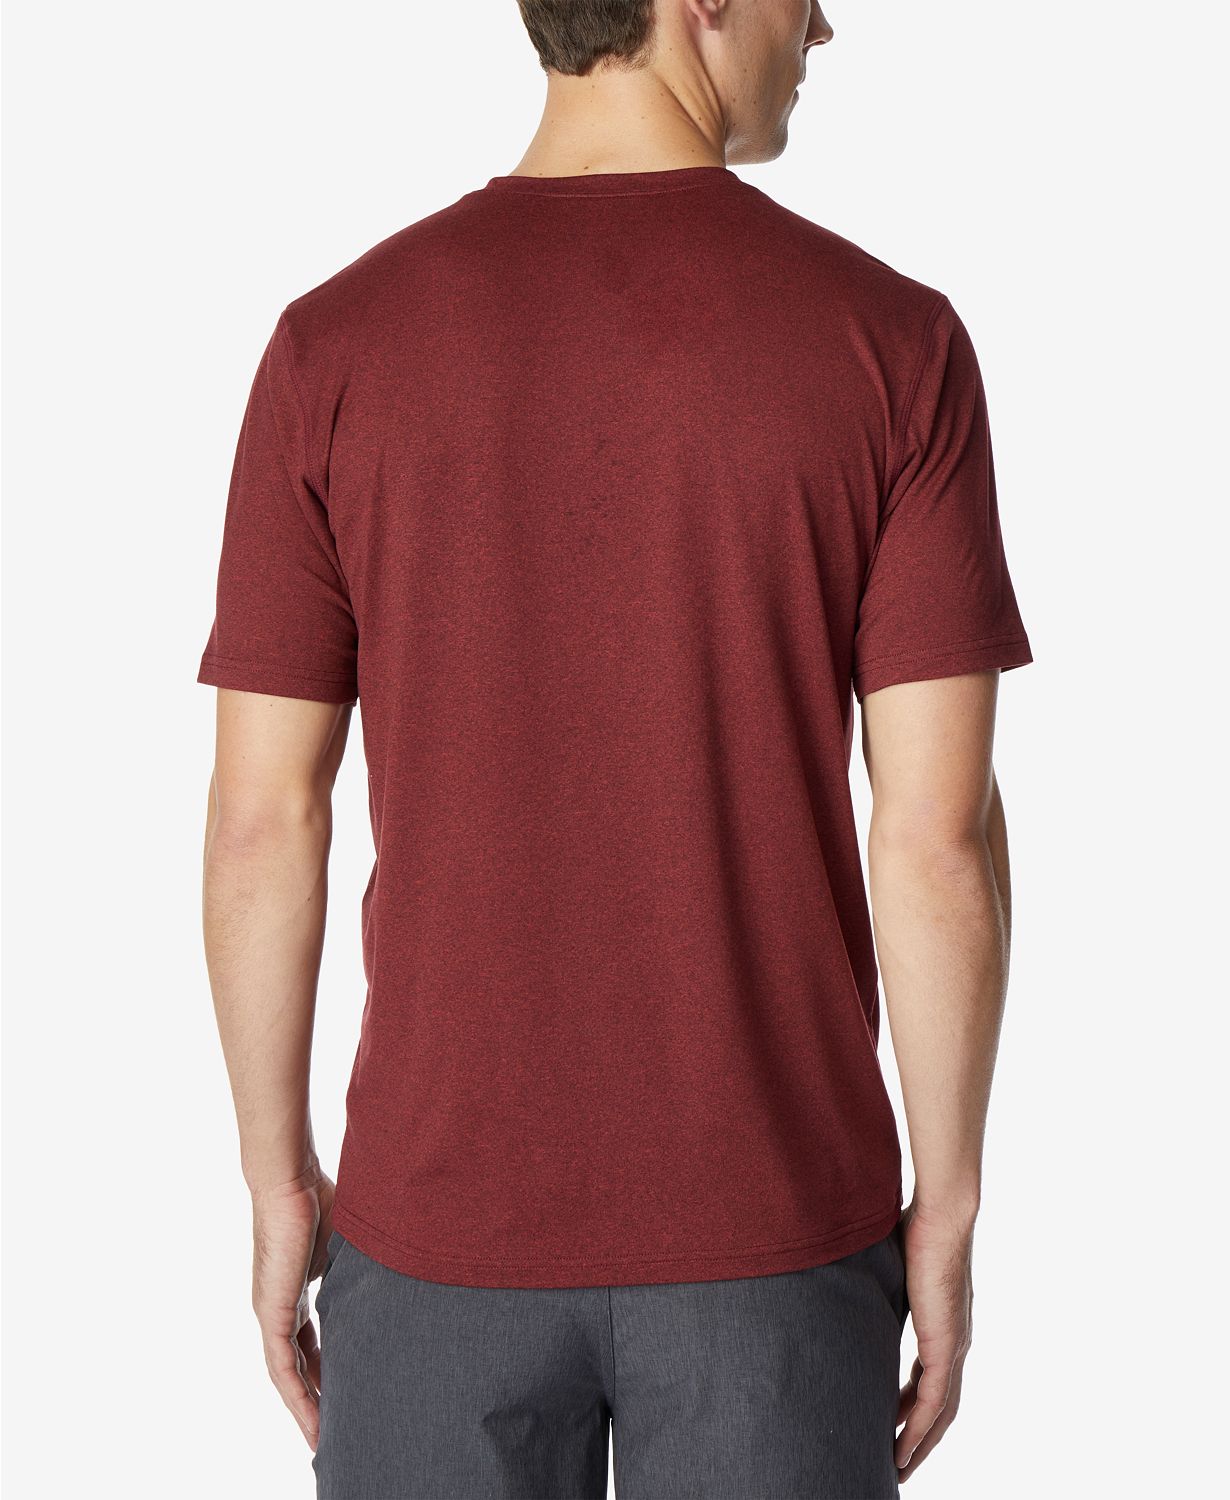 32 Degrees Mens T-shirt Red